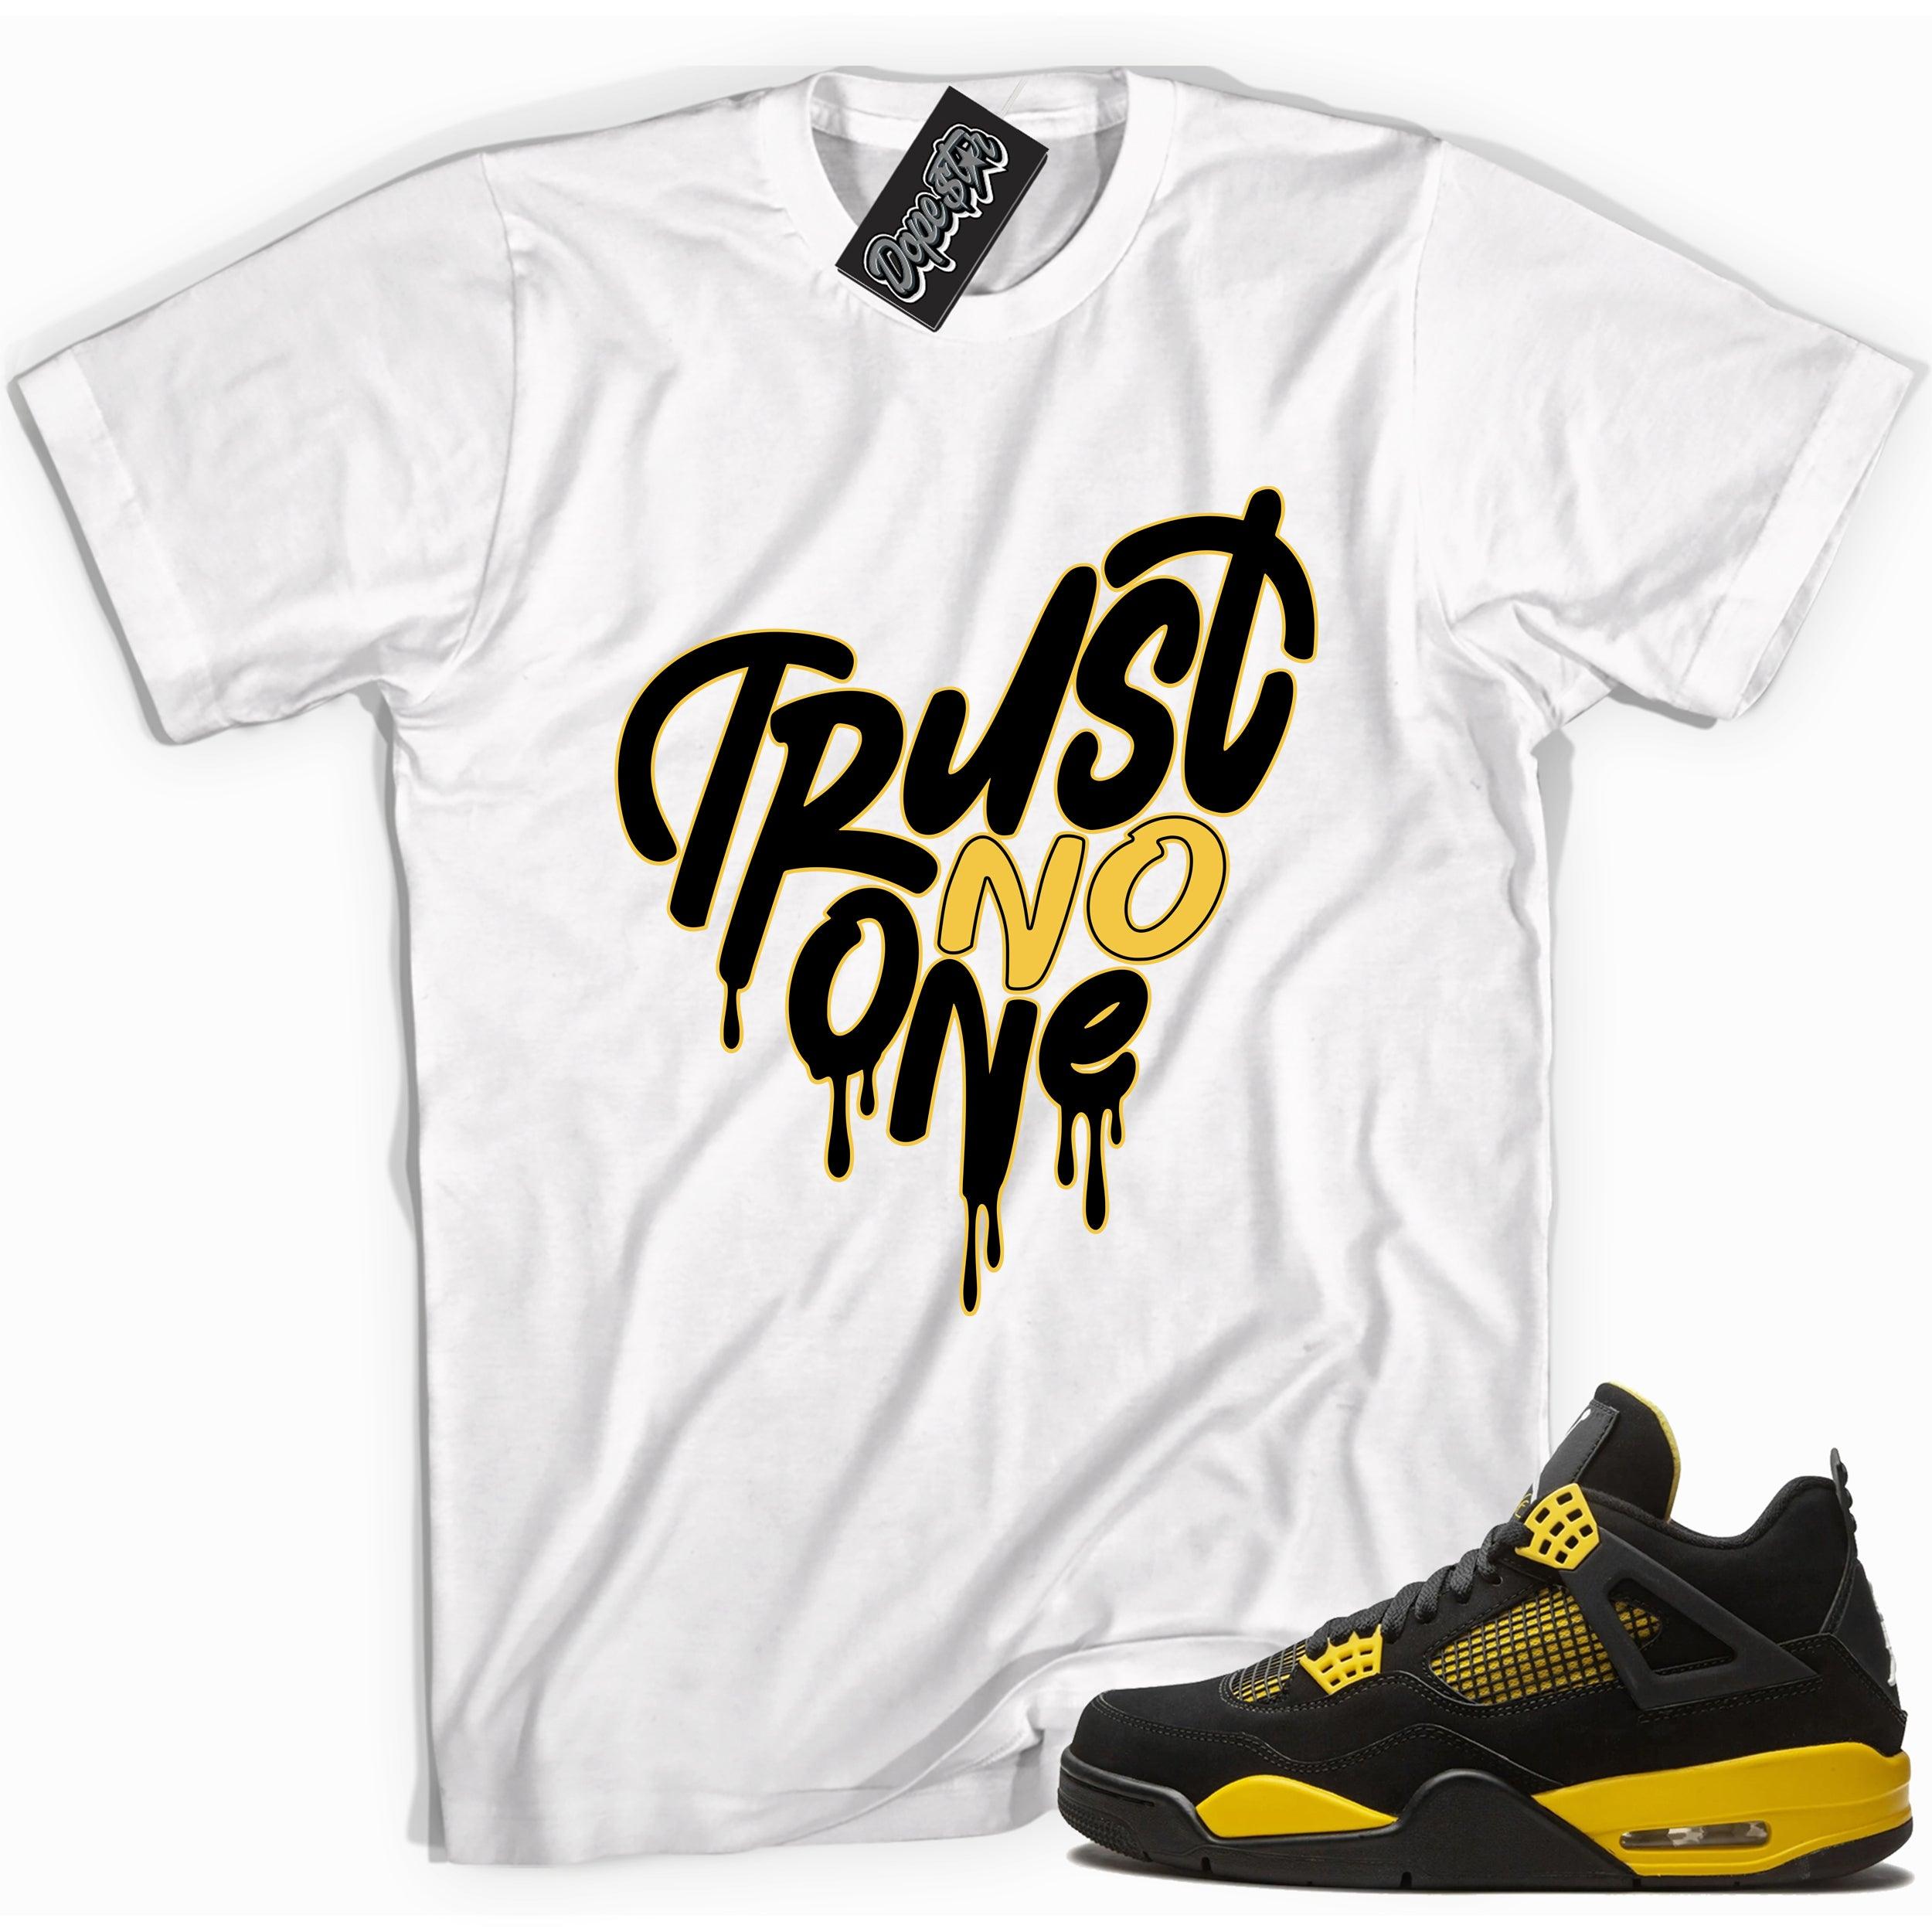 Cool white graphic tee with 'trust no one heart' print, that perfectly matches Air Jordan 4 Thunder sneakers